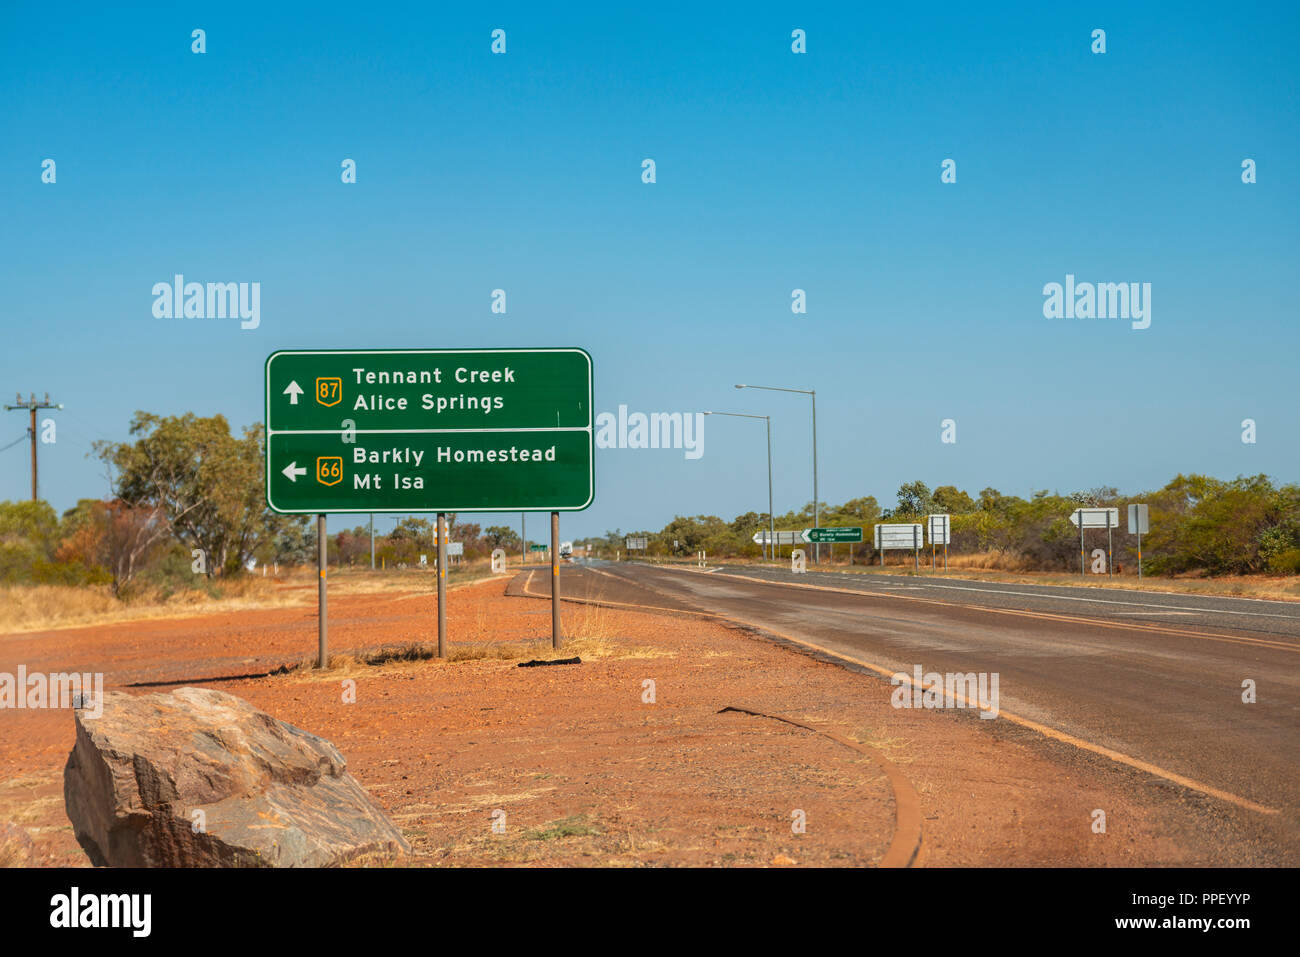 Road sign at Threeways, Australia, showing, Alice Springs and Tennant creek, Nothern Territory Stock Photo